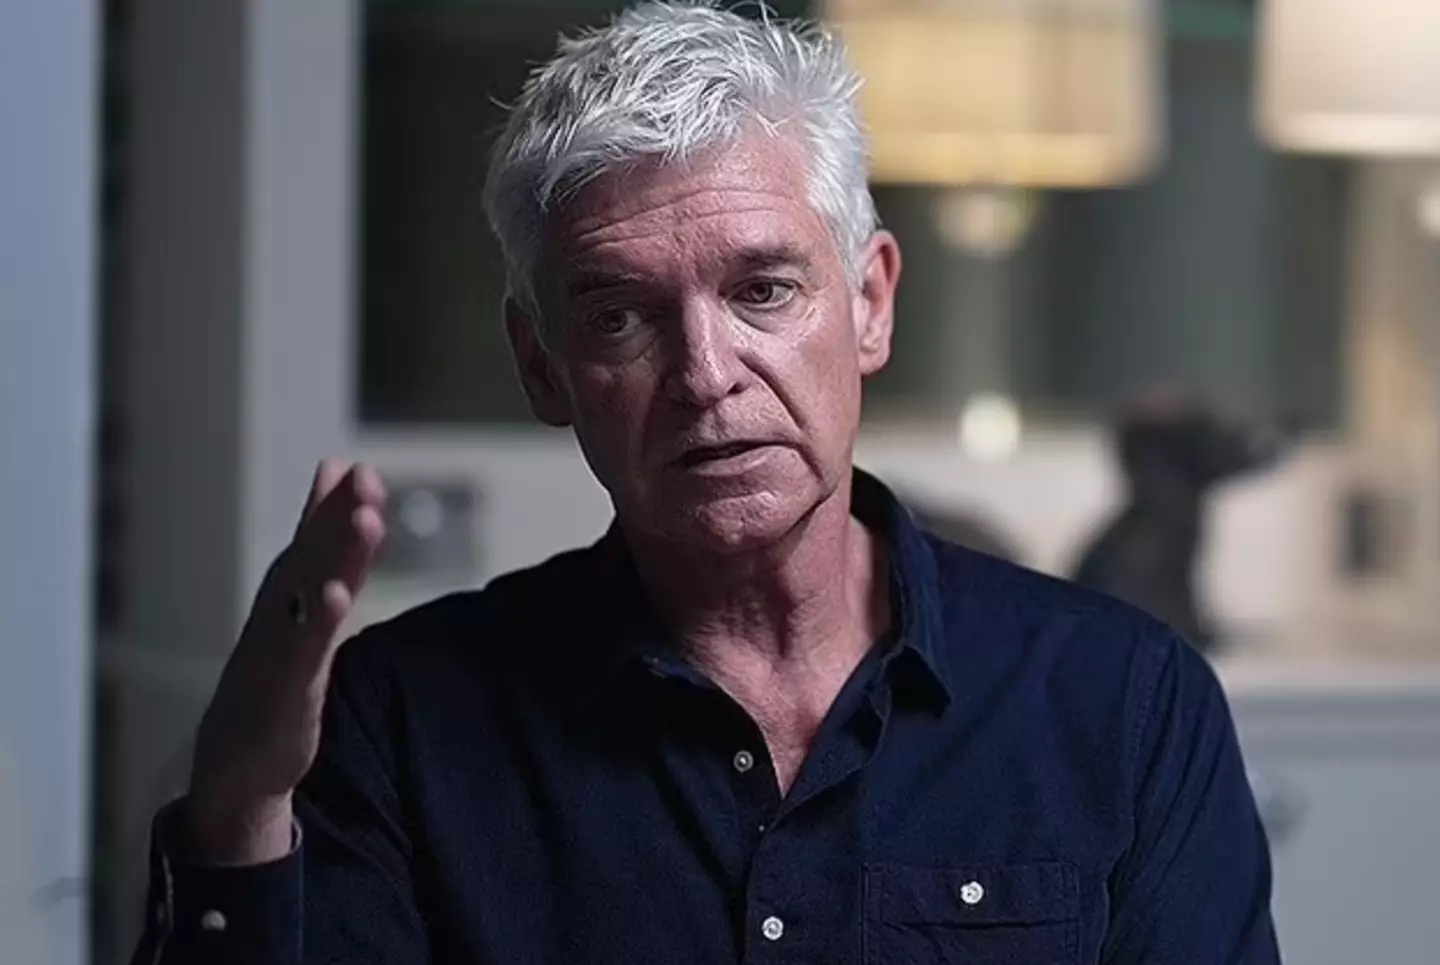 Phillip Schofield sat down with the BBC following his affair scandal.